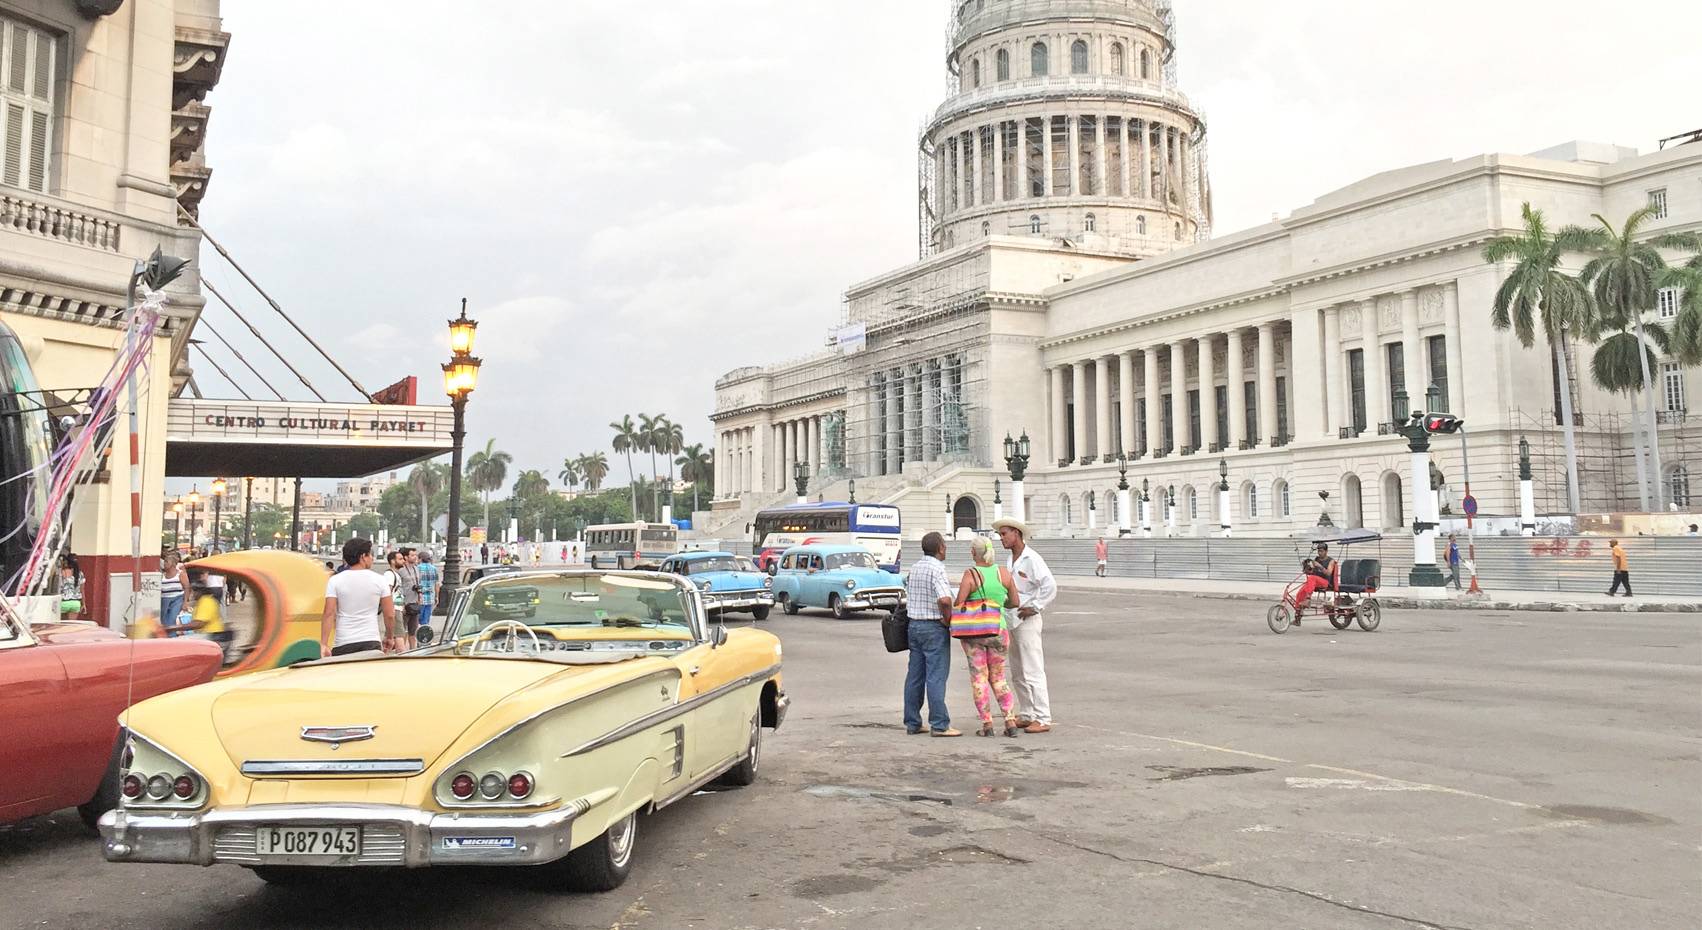 A yellow classic American car in front of the Capitolio in Havana